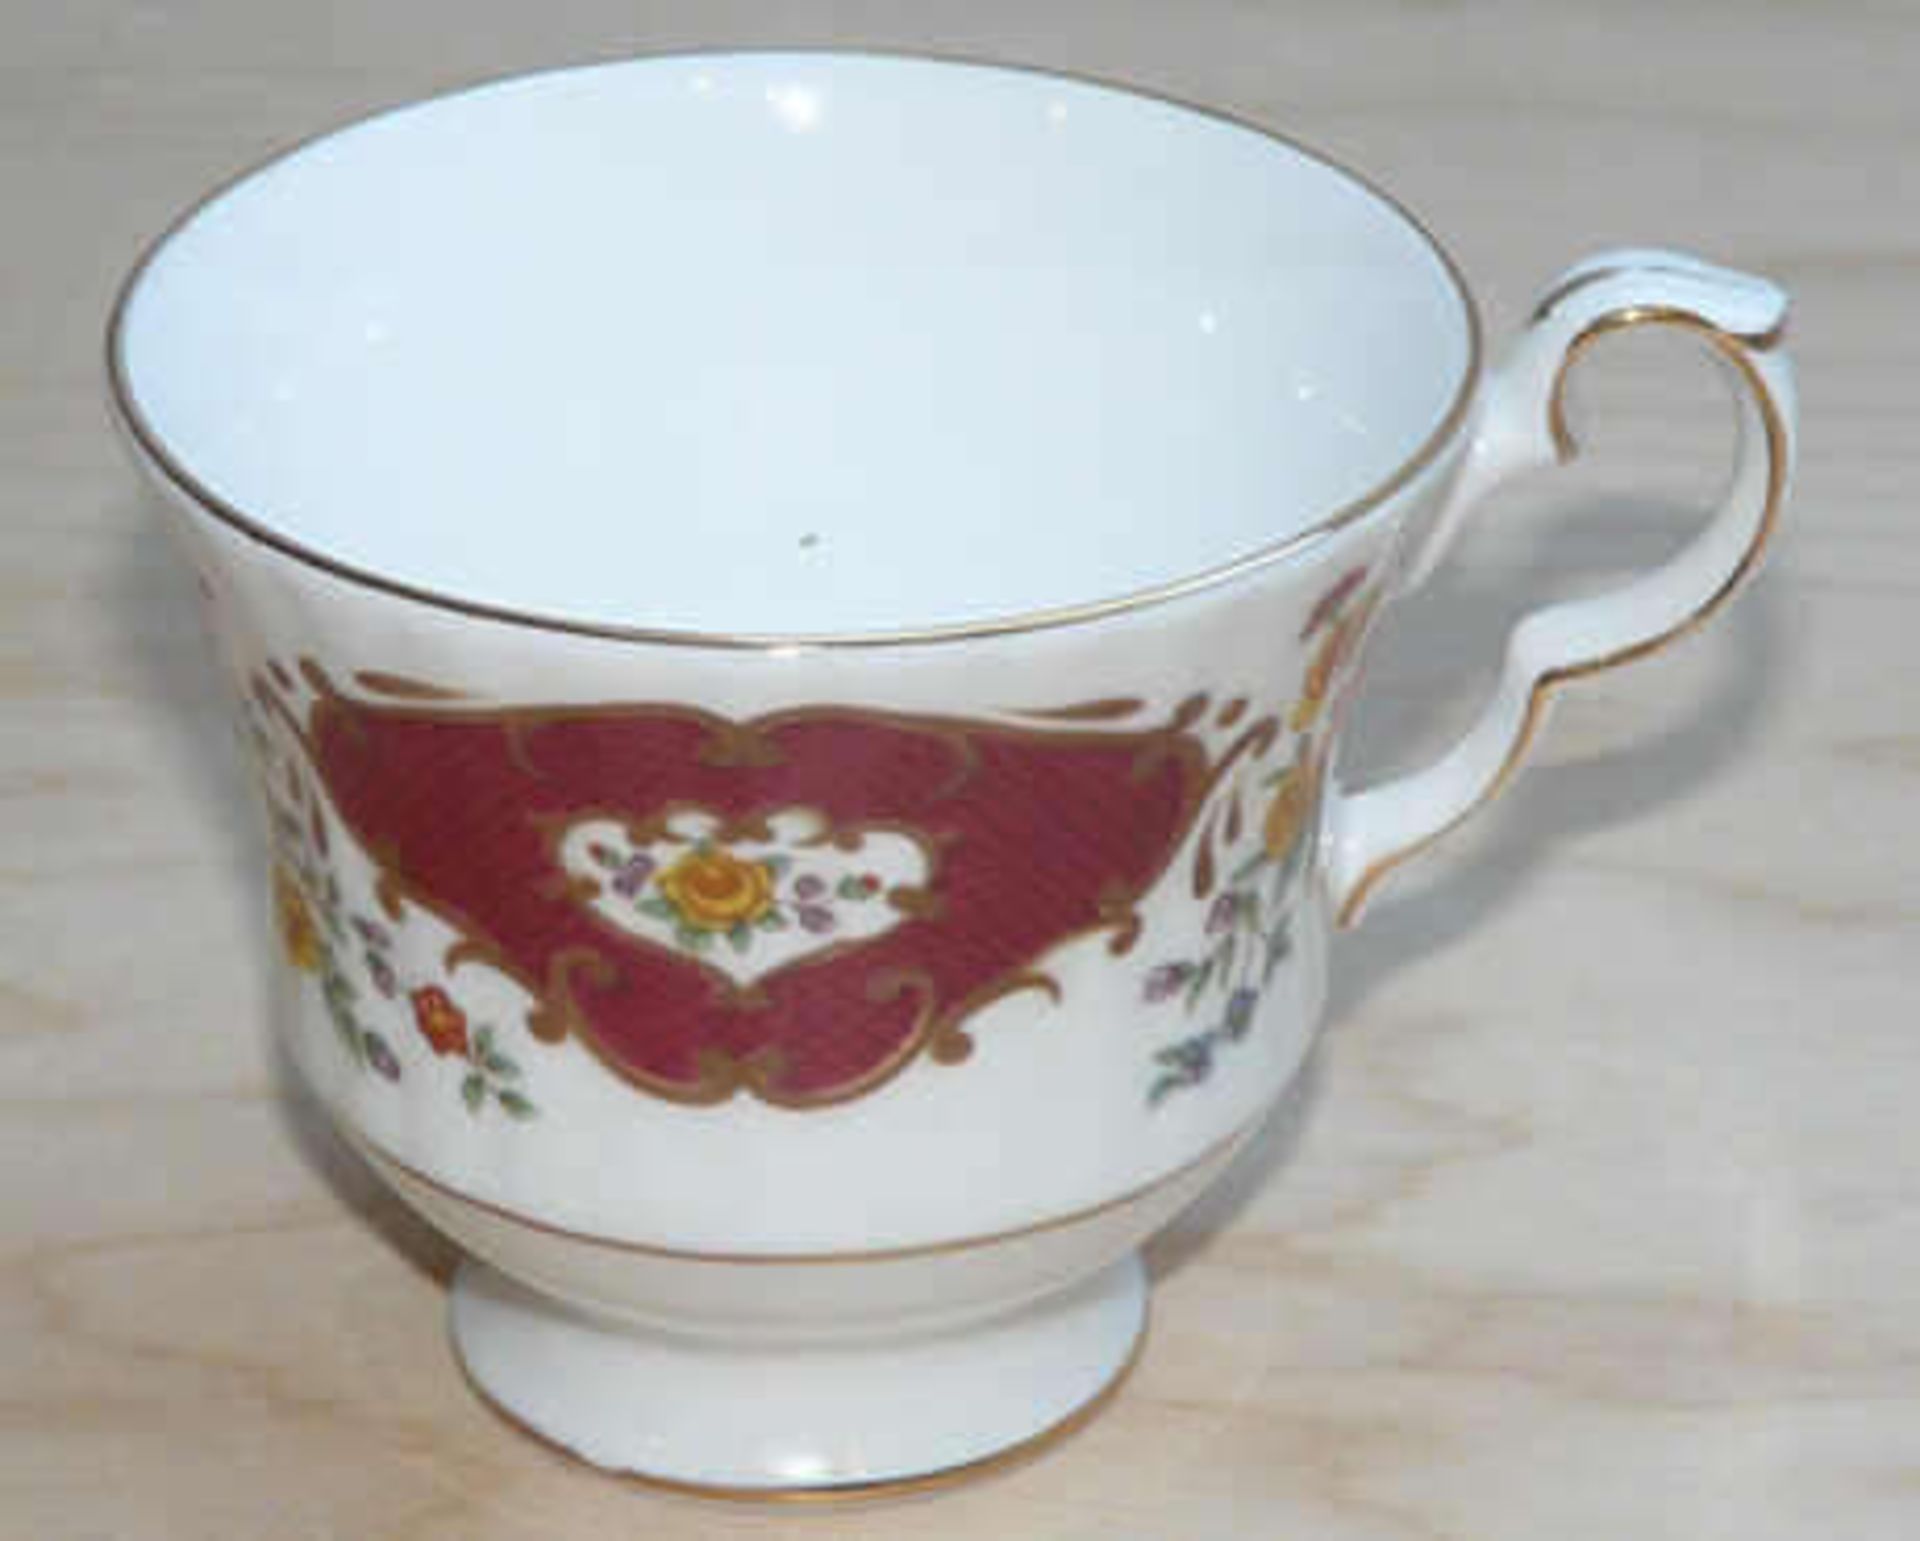 Kaffeeservice rot mit Blumendesign und Goldrand, Made in England, Royal Victorian bone china; - Image 2 of 4